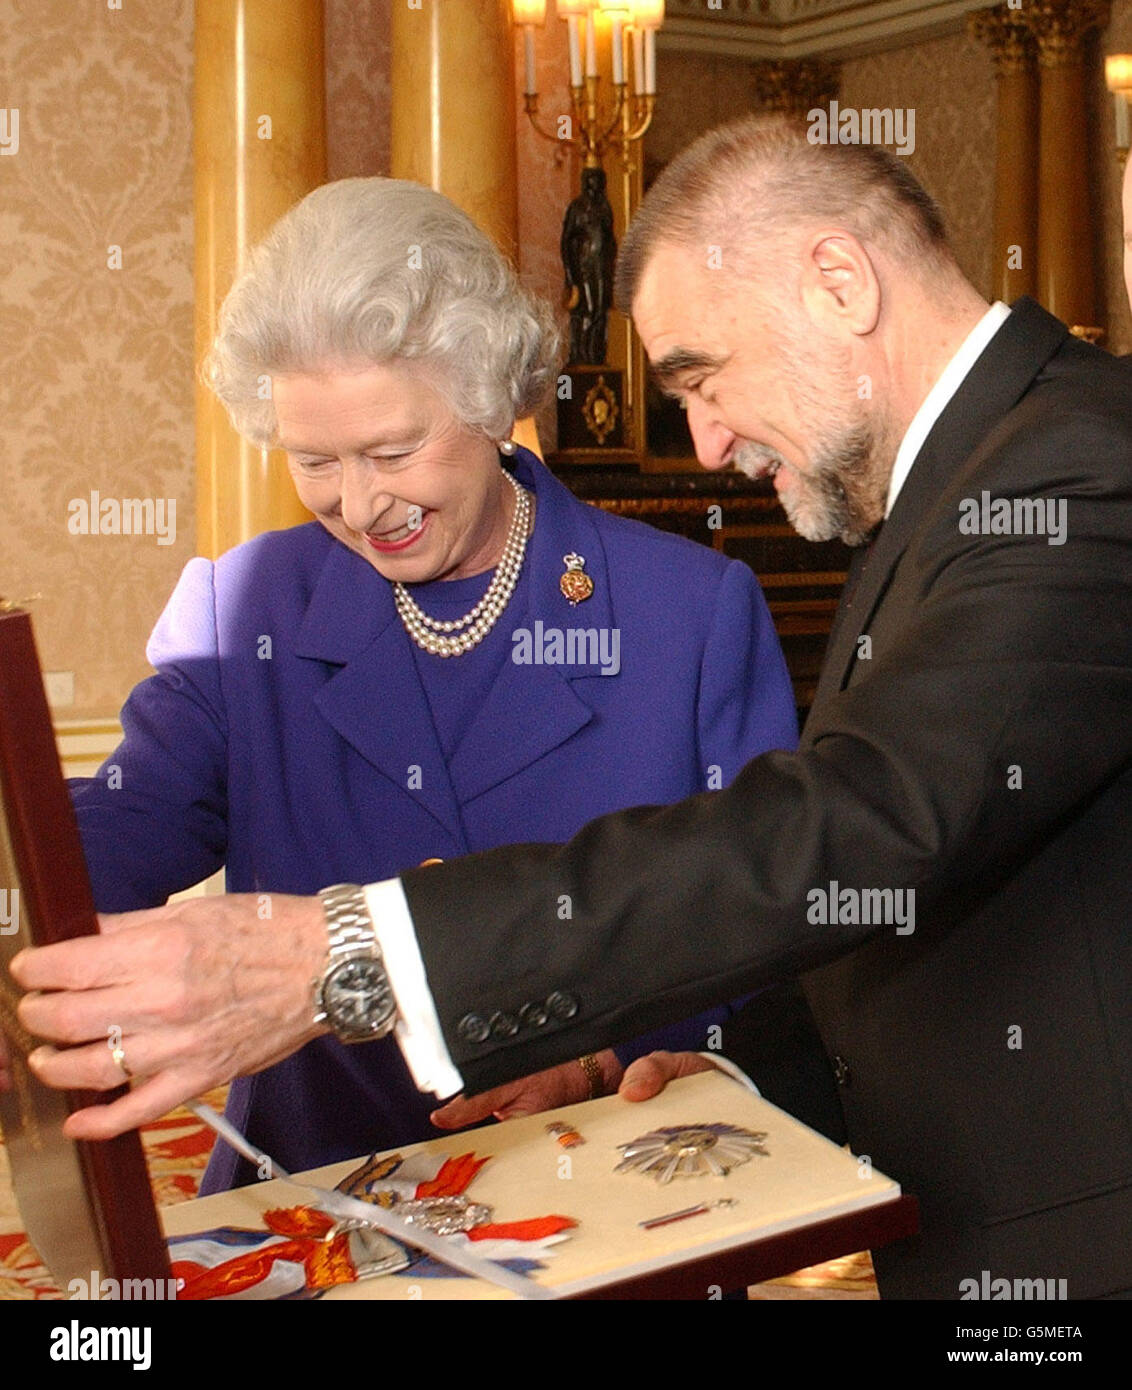 Britain's Queen Elizabeth II exchanges gifts with the President of Croatia Stjepan Mesic at Buckingham Palace in central London. Mesic was in London as part of a three-day visit to the Britain, his first as head of state for Croatia. Stock Photo